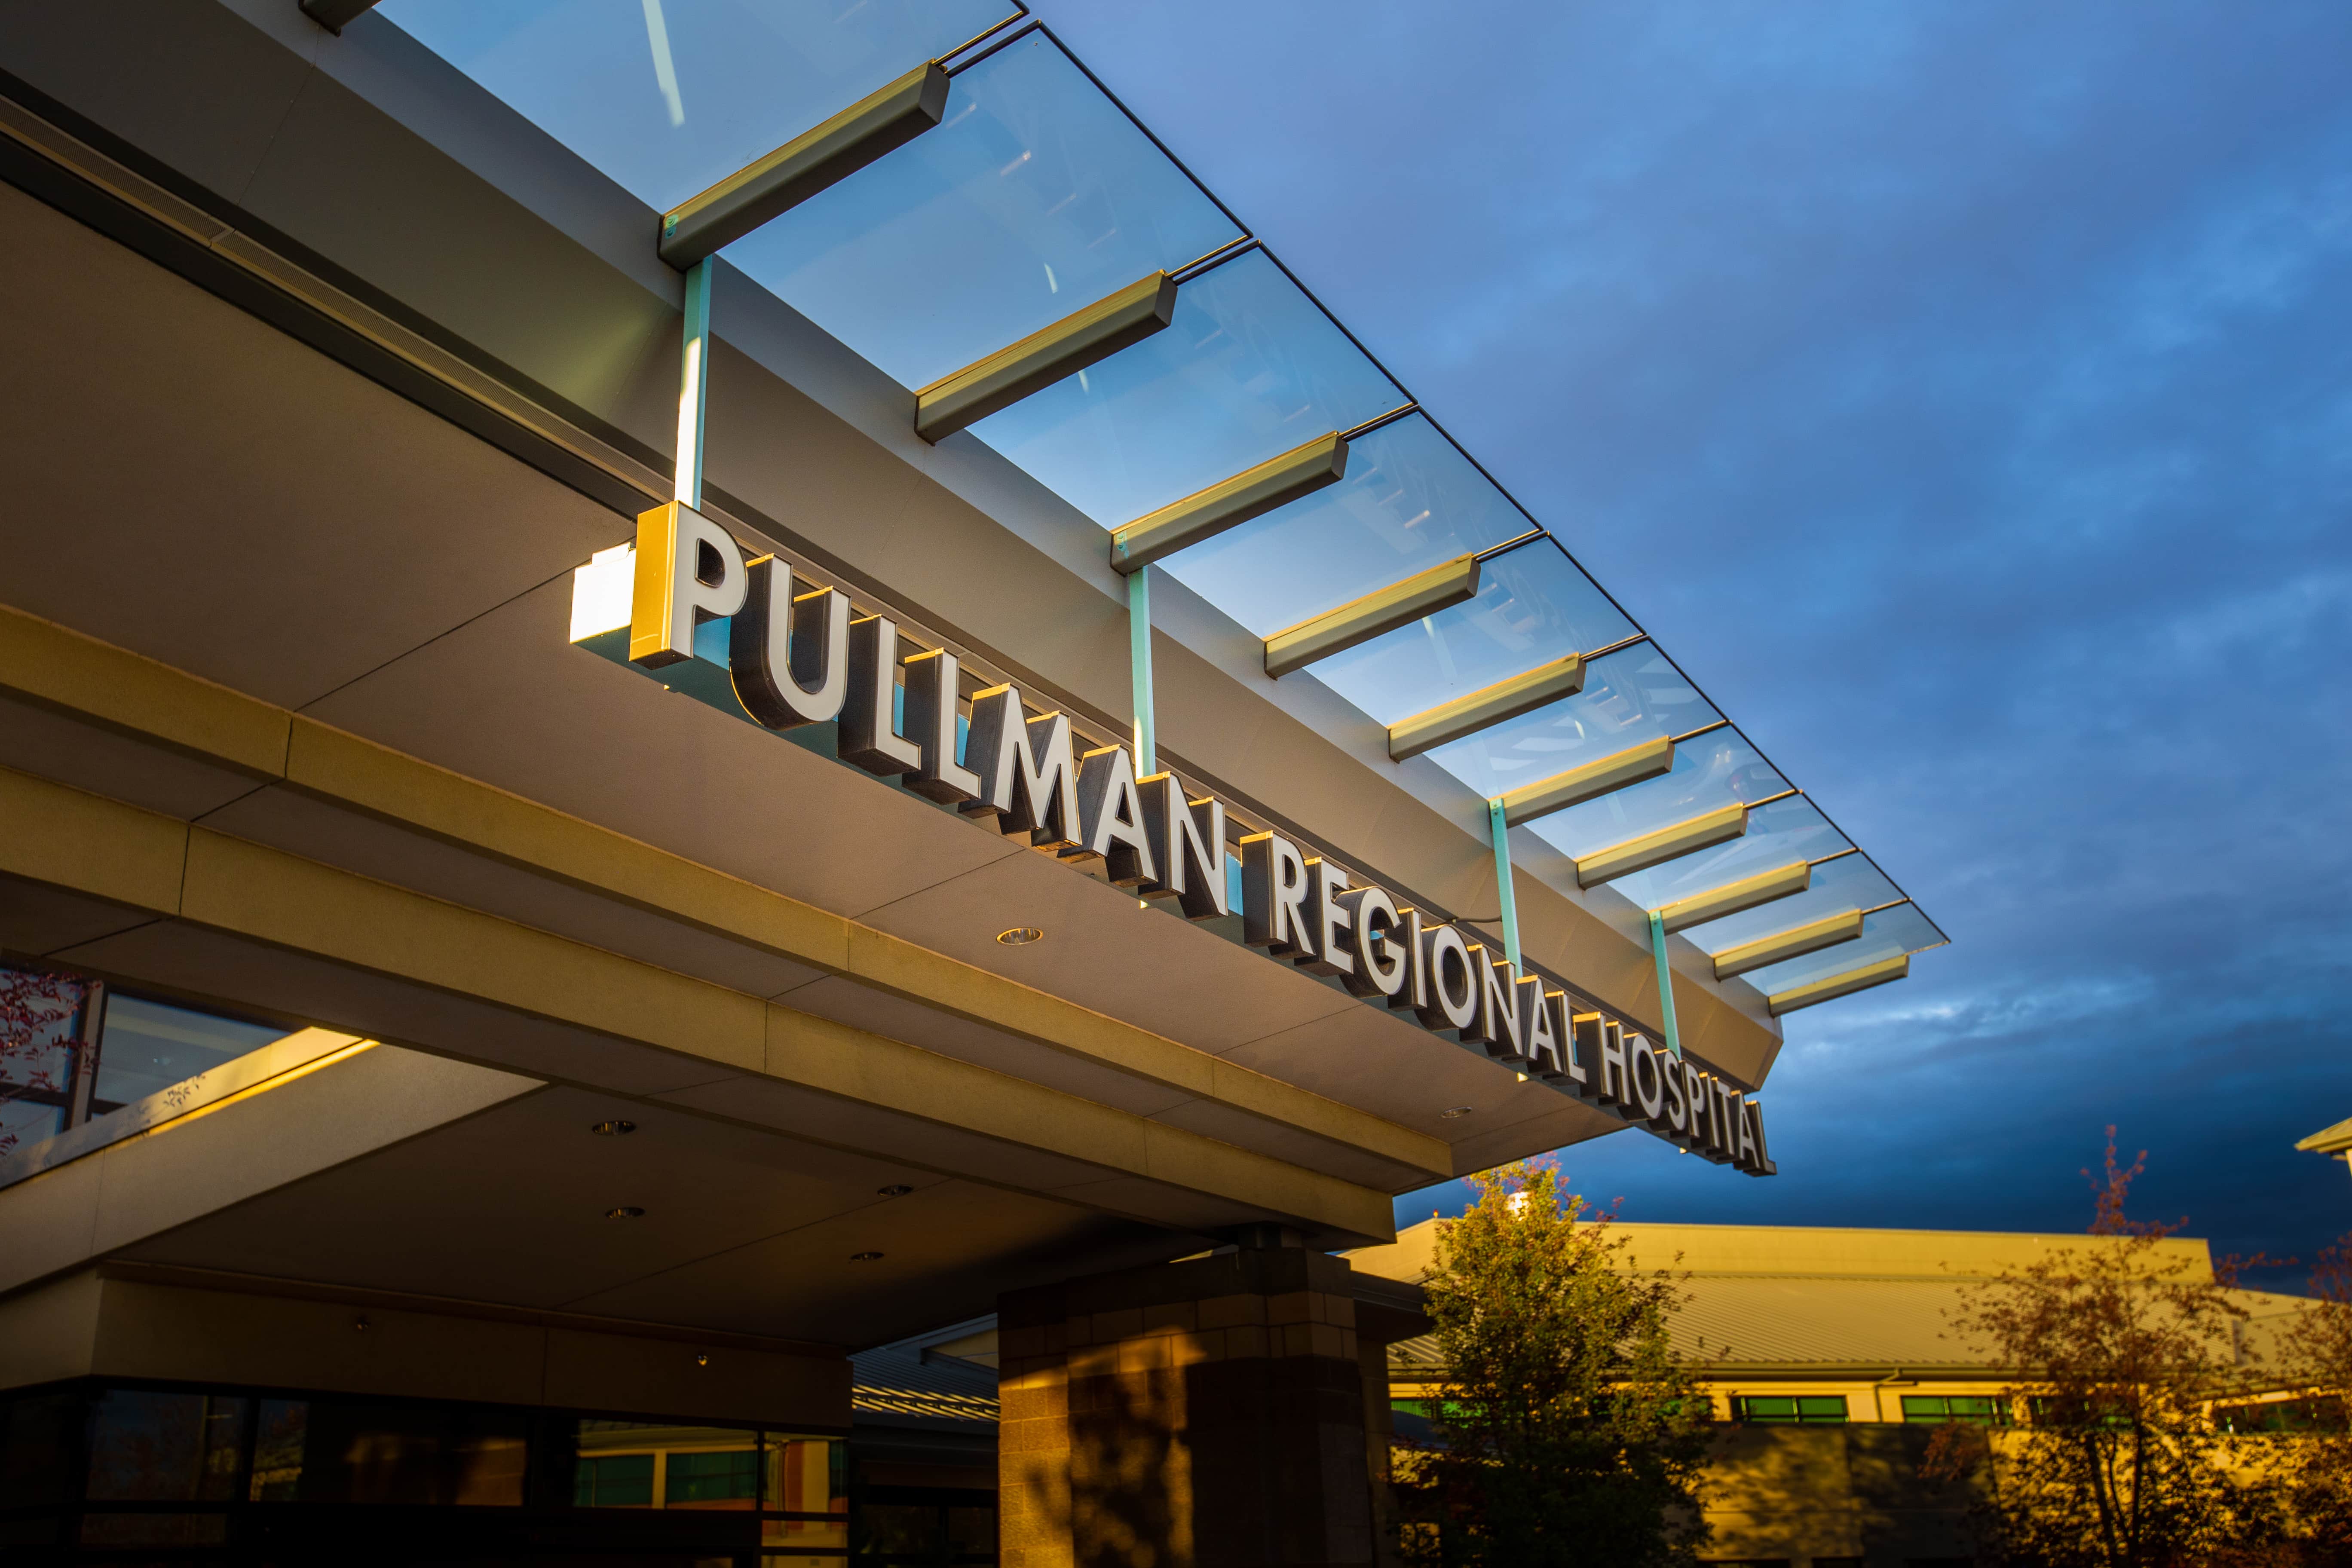 Selection Committee Named for Pullman Regional Hospital CEO Search